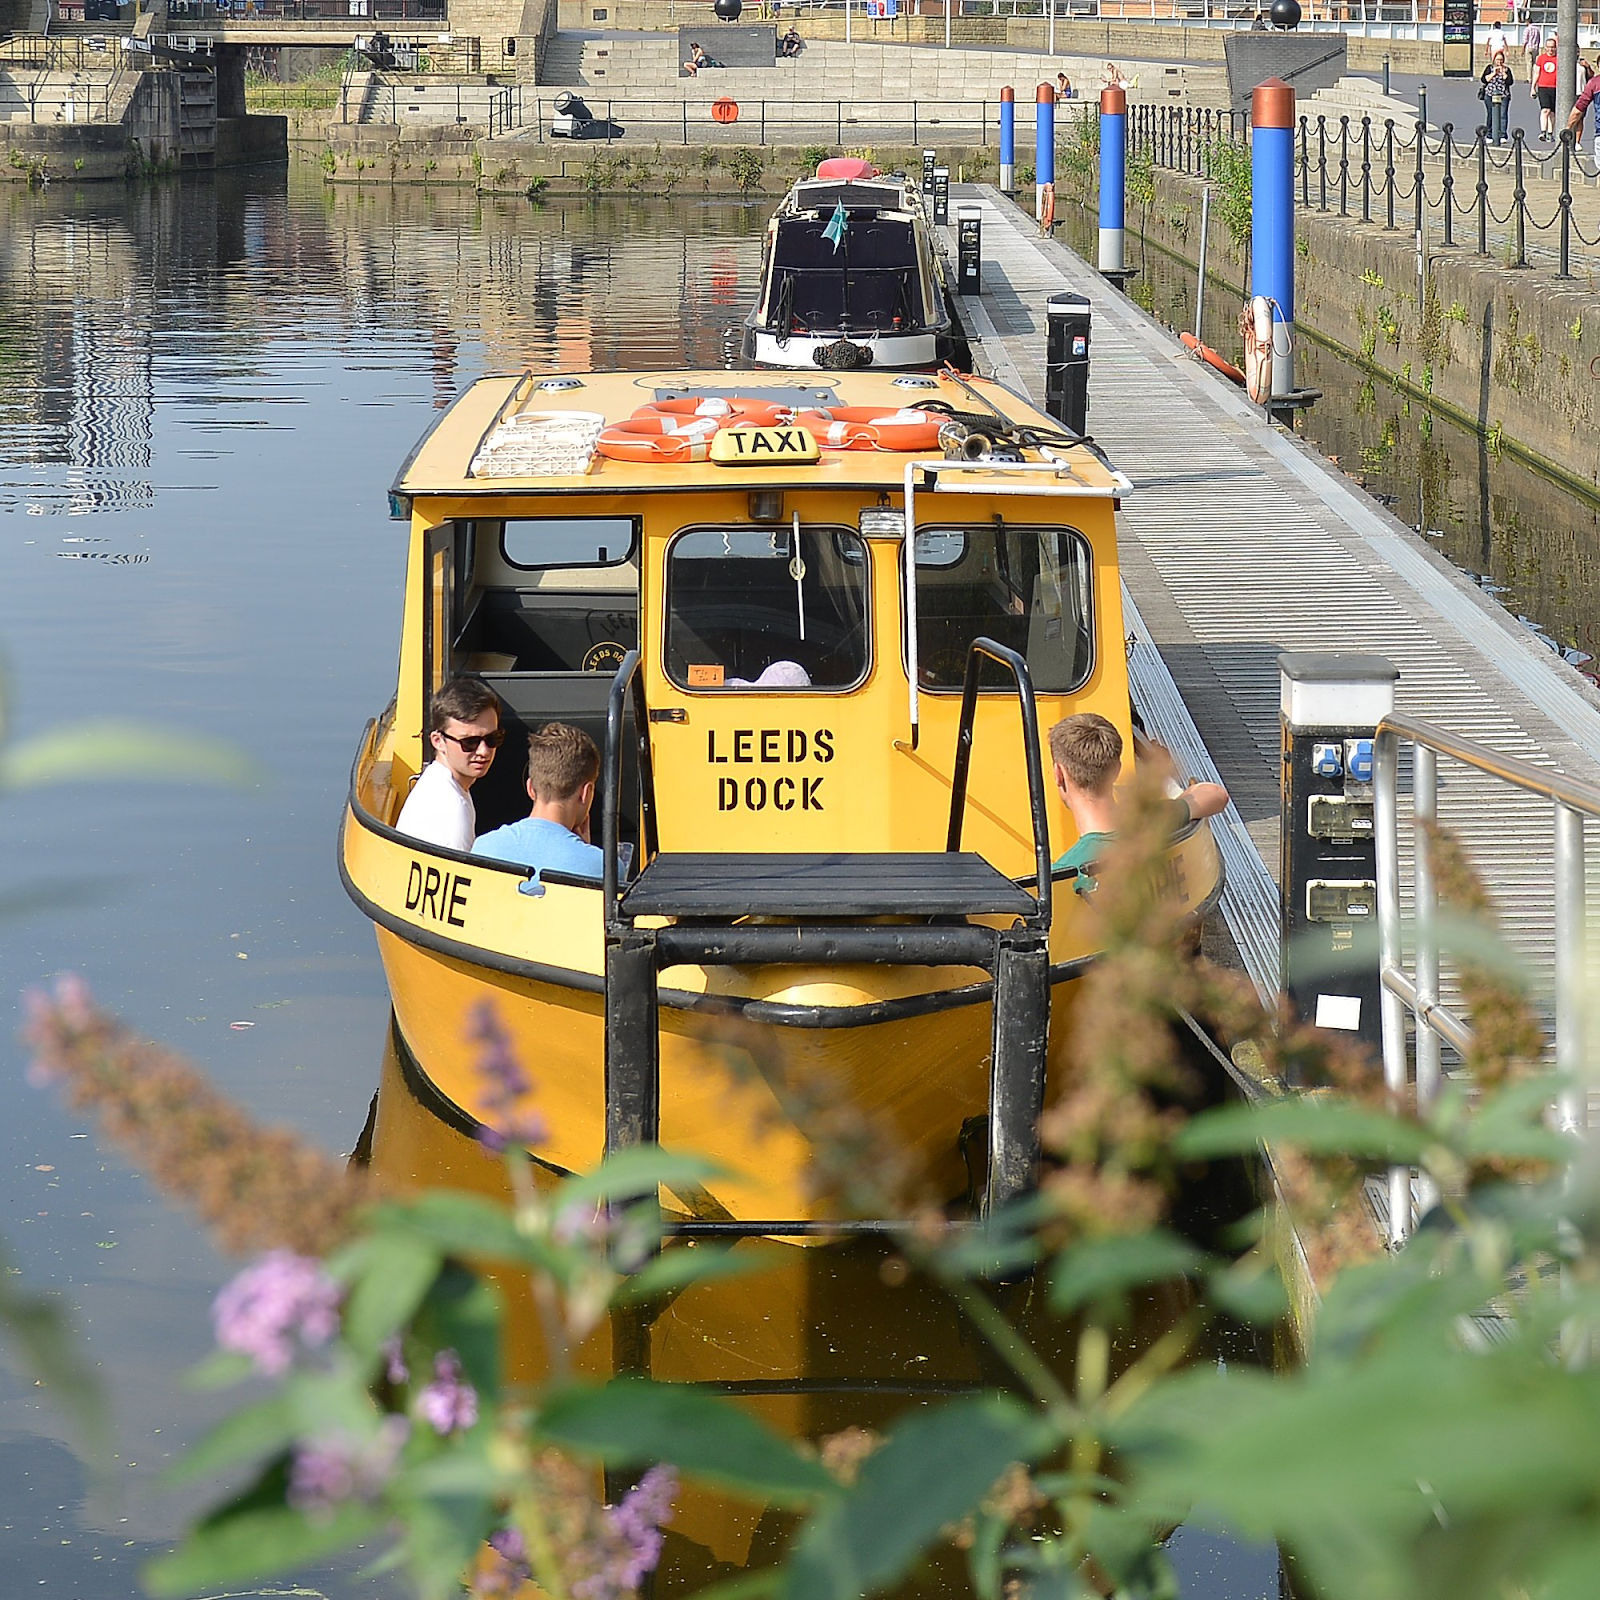 A water taxi in Leeds.